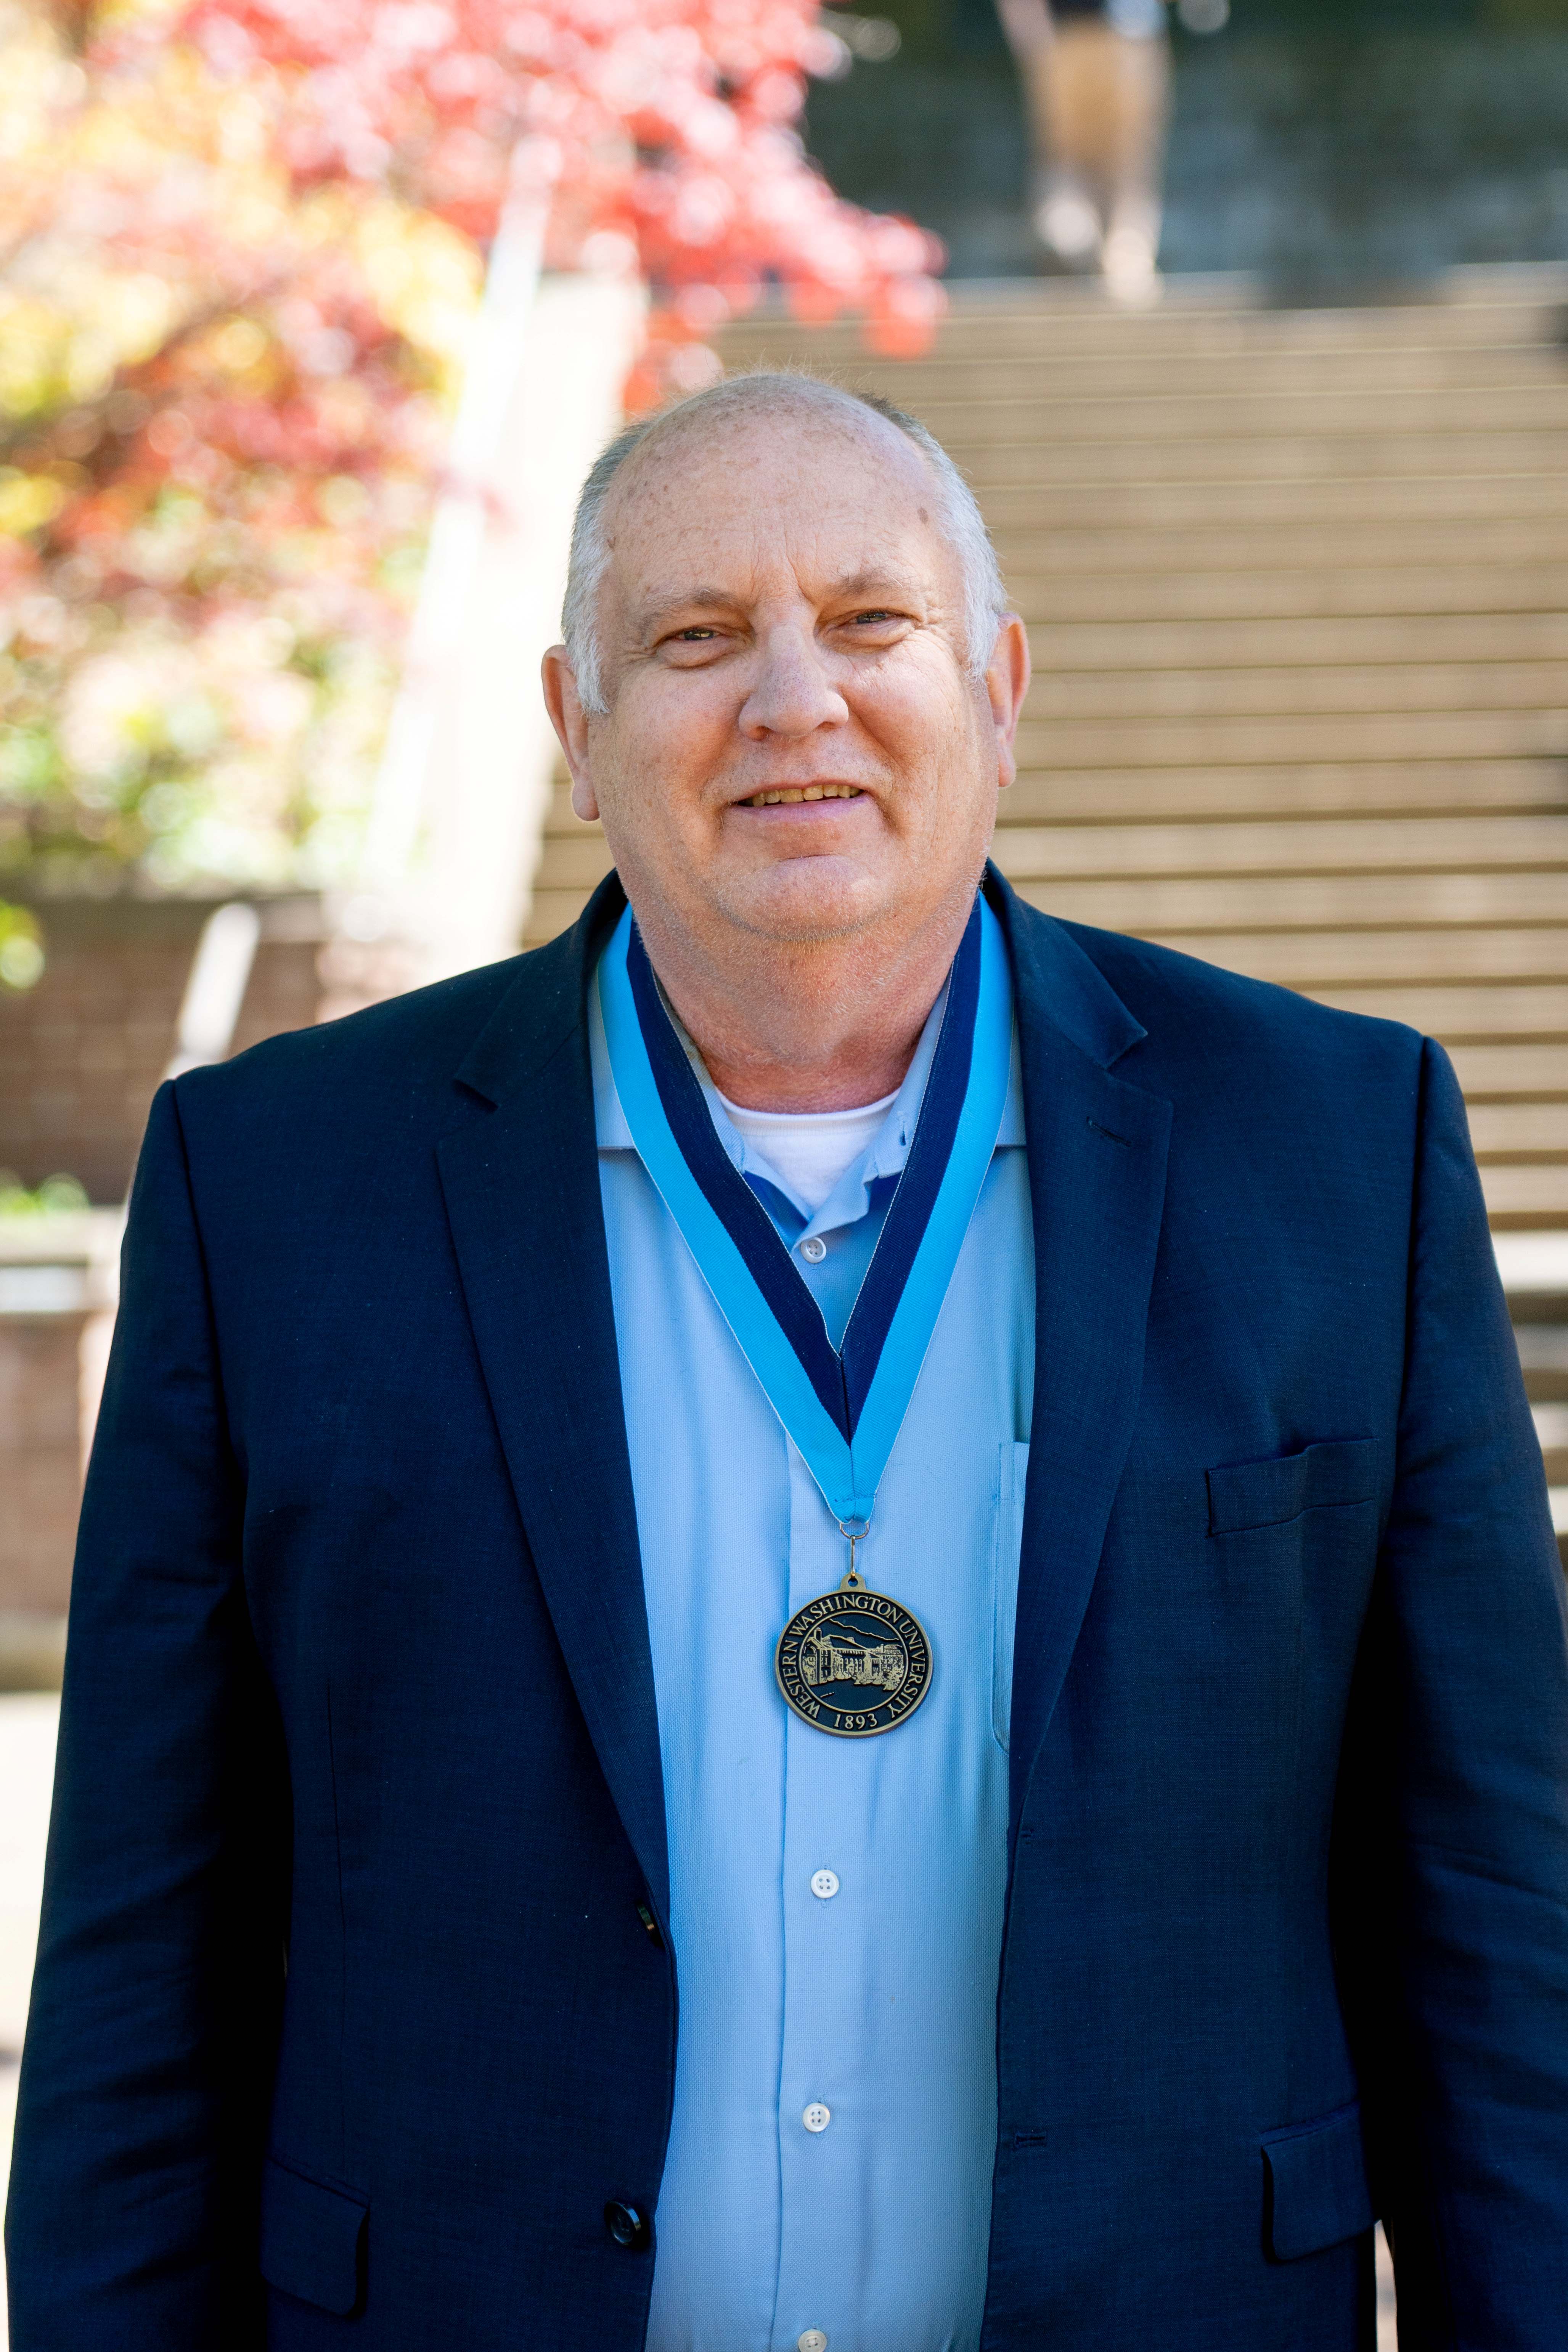 Rick Benner stands in front of the Old Main steps wearing a navy blazer and WWU award medallion